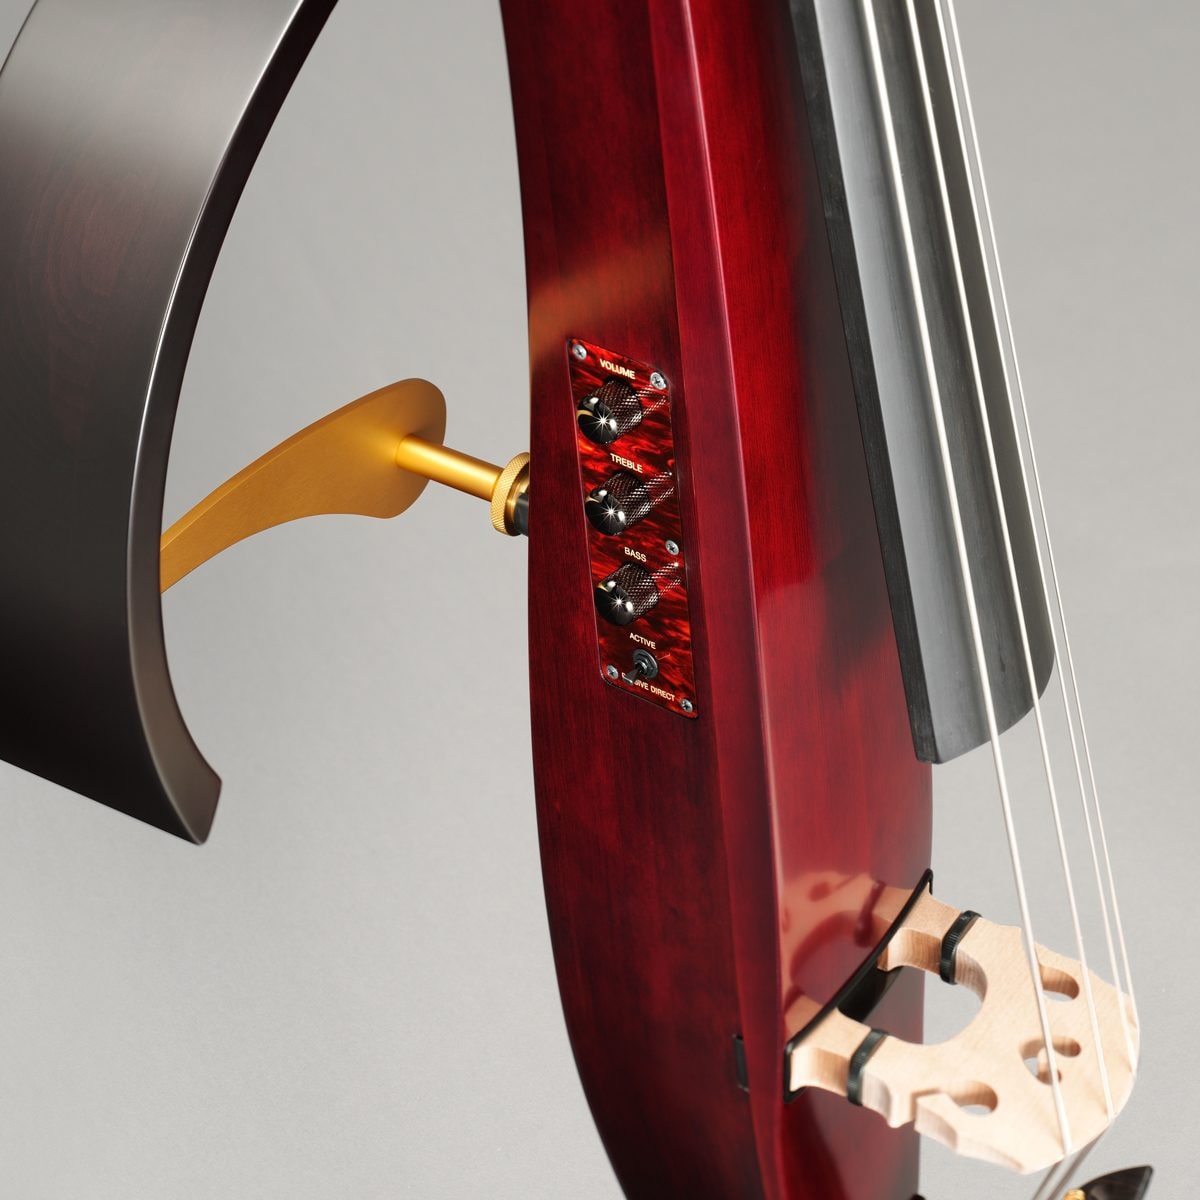 SLB-200LTD - Overview - Silent™ Series Violins, Violas, Cellos, and 